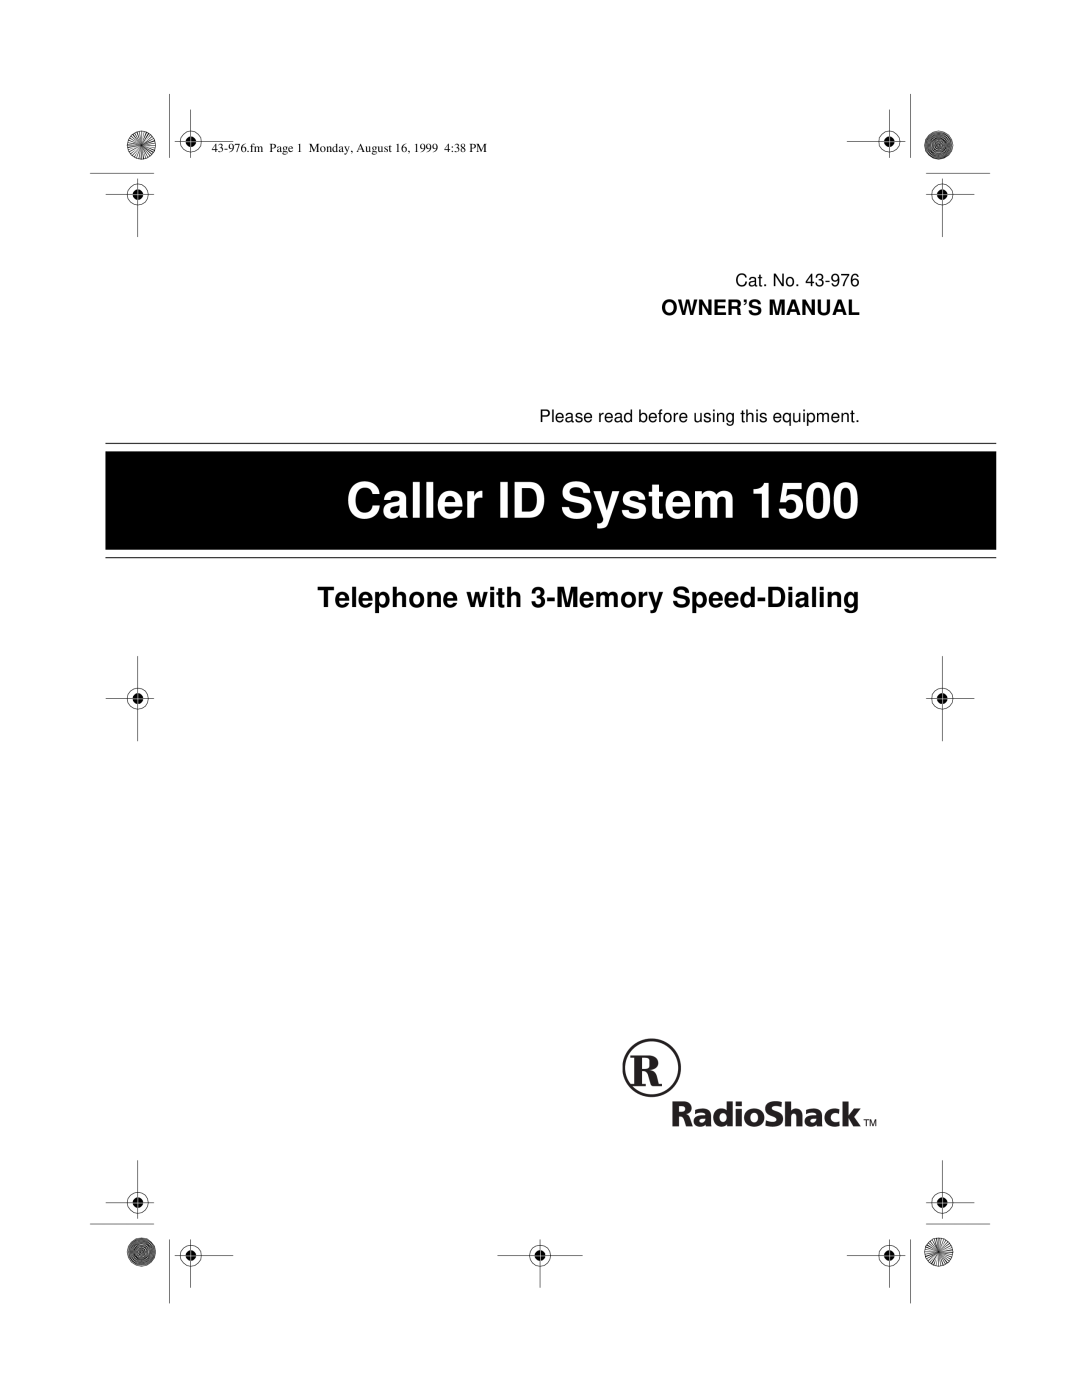 Radio Shack 1500 owner manual Telephone with 3-Memory Speed-Dialing, Caller ID System 